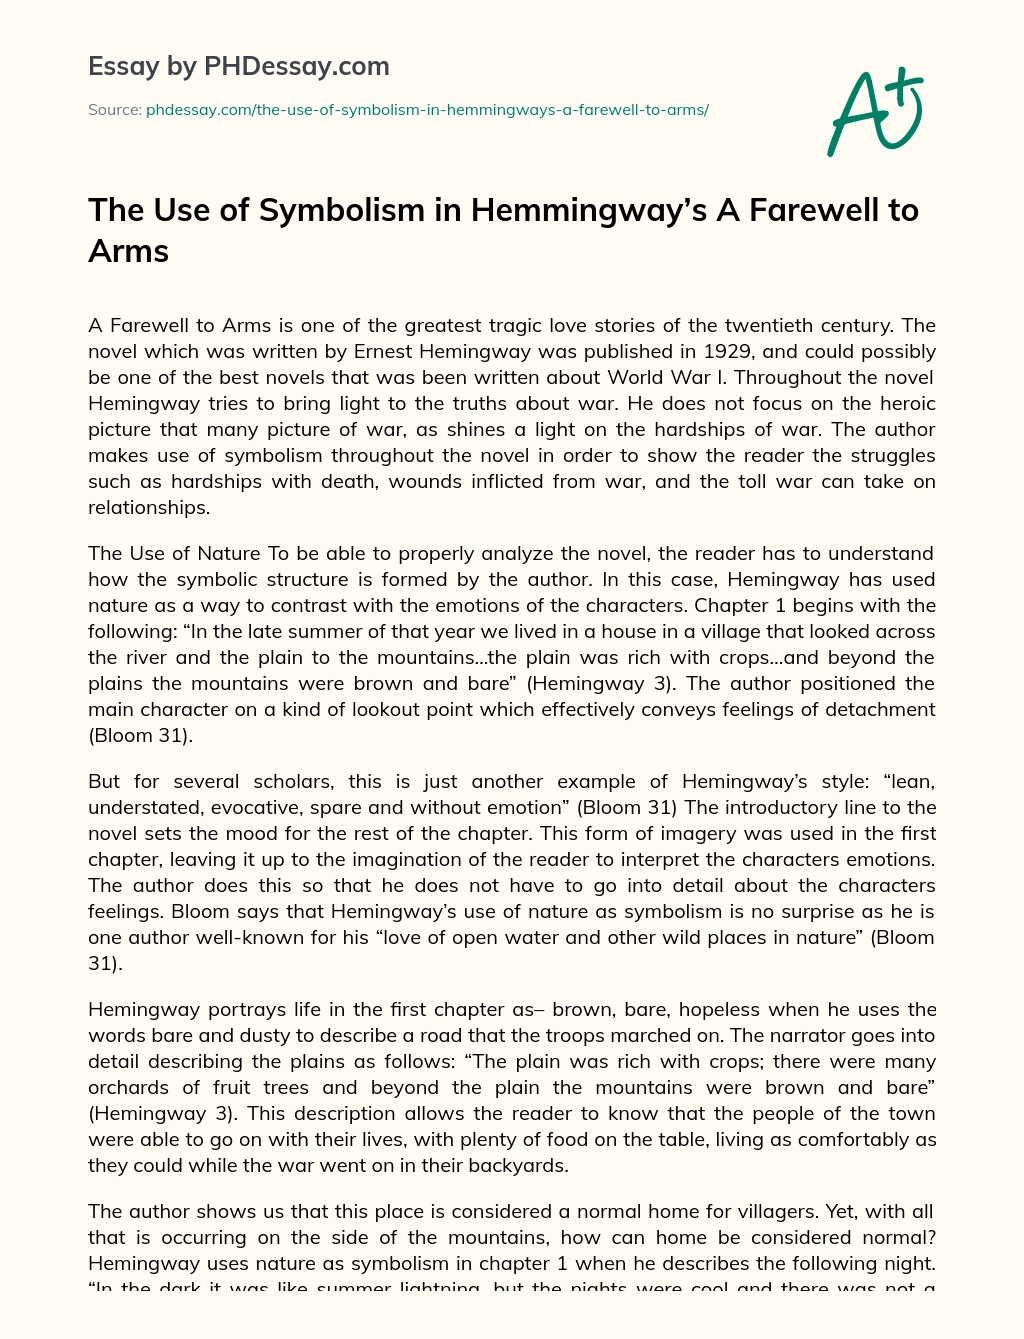 The Use of Symbolism in Hemmingway’s A Farewell to Arms essay